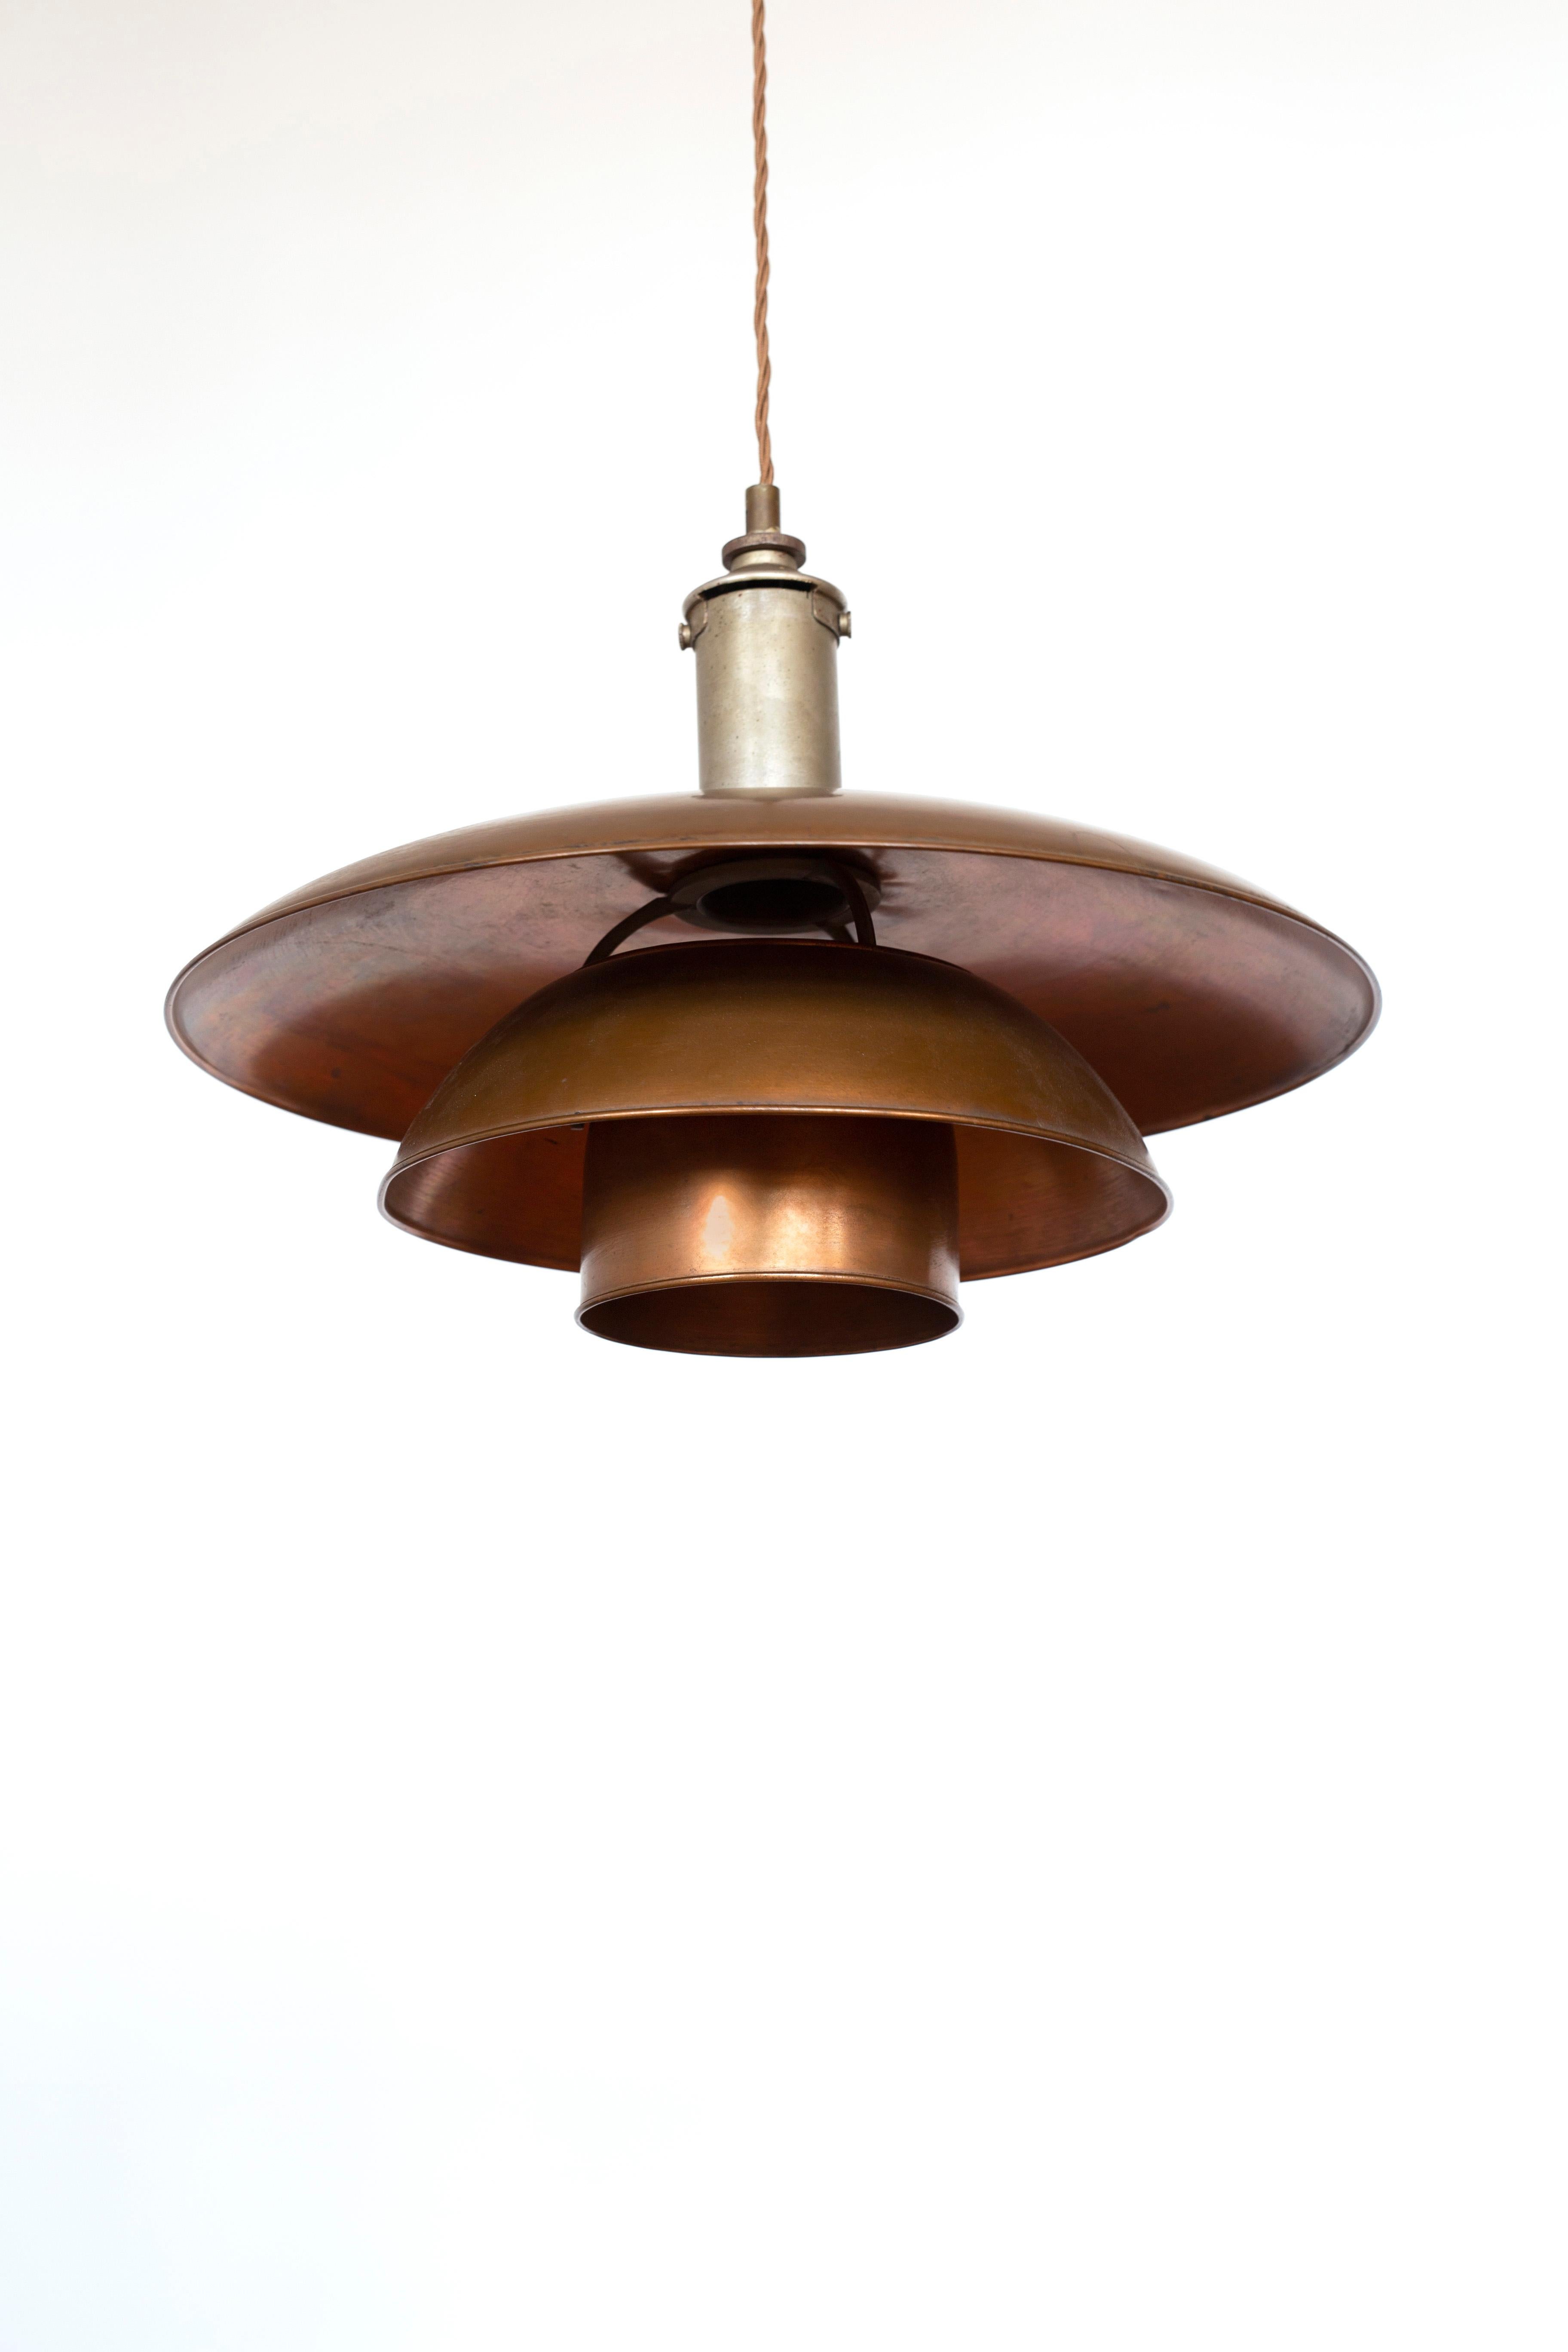 Metal Early Poul Henningsen 4/4 Copper Ceiling Lamp, 1926 For Sale